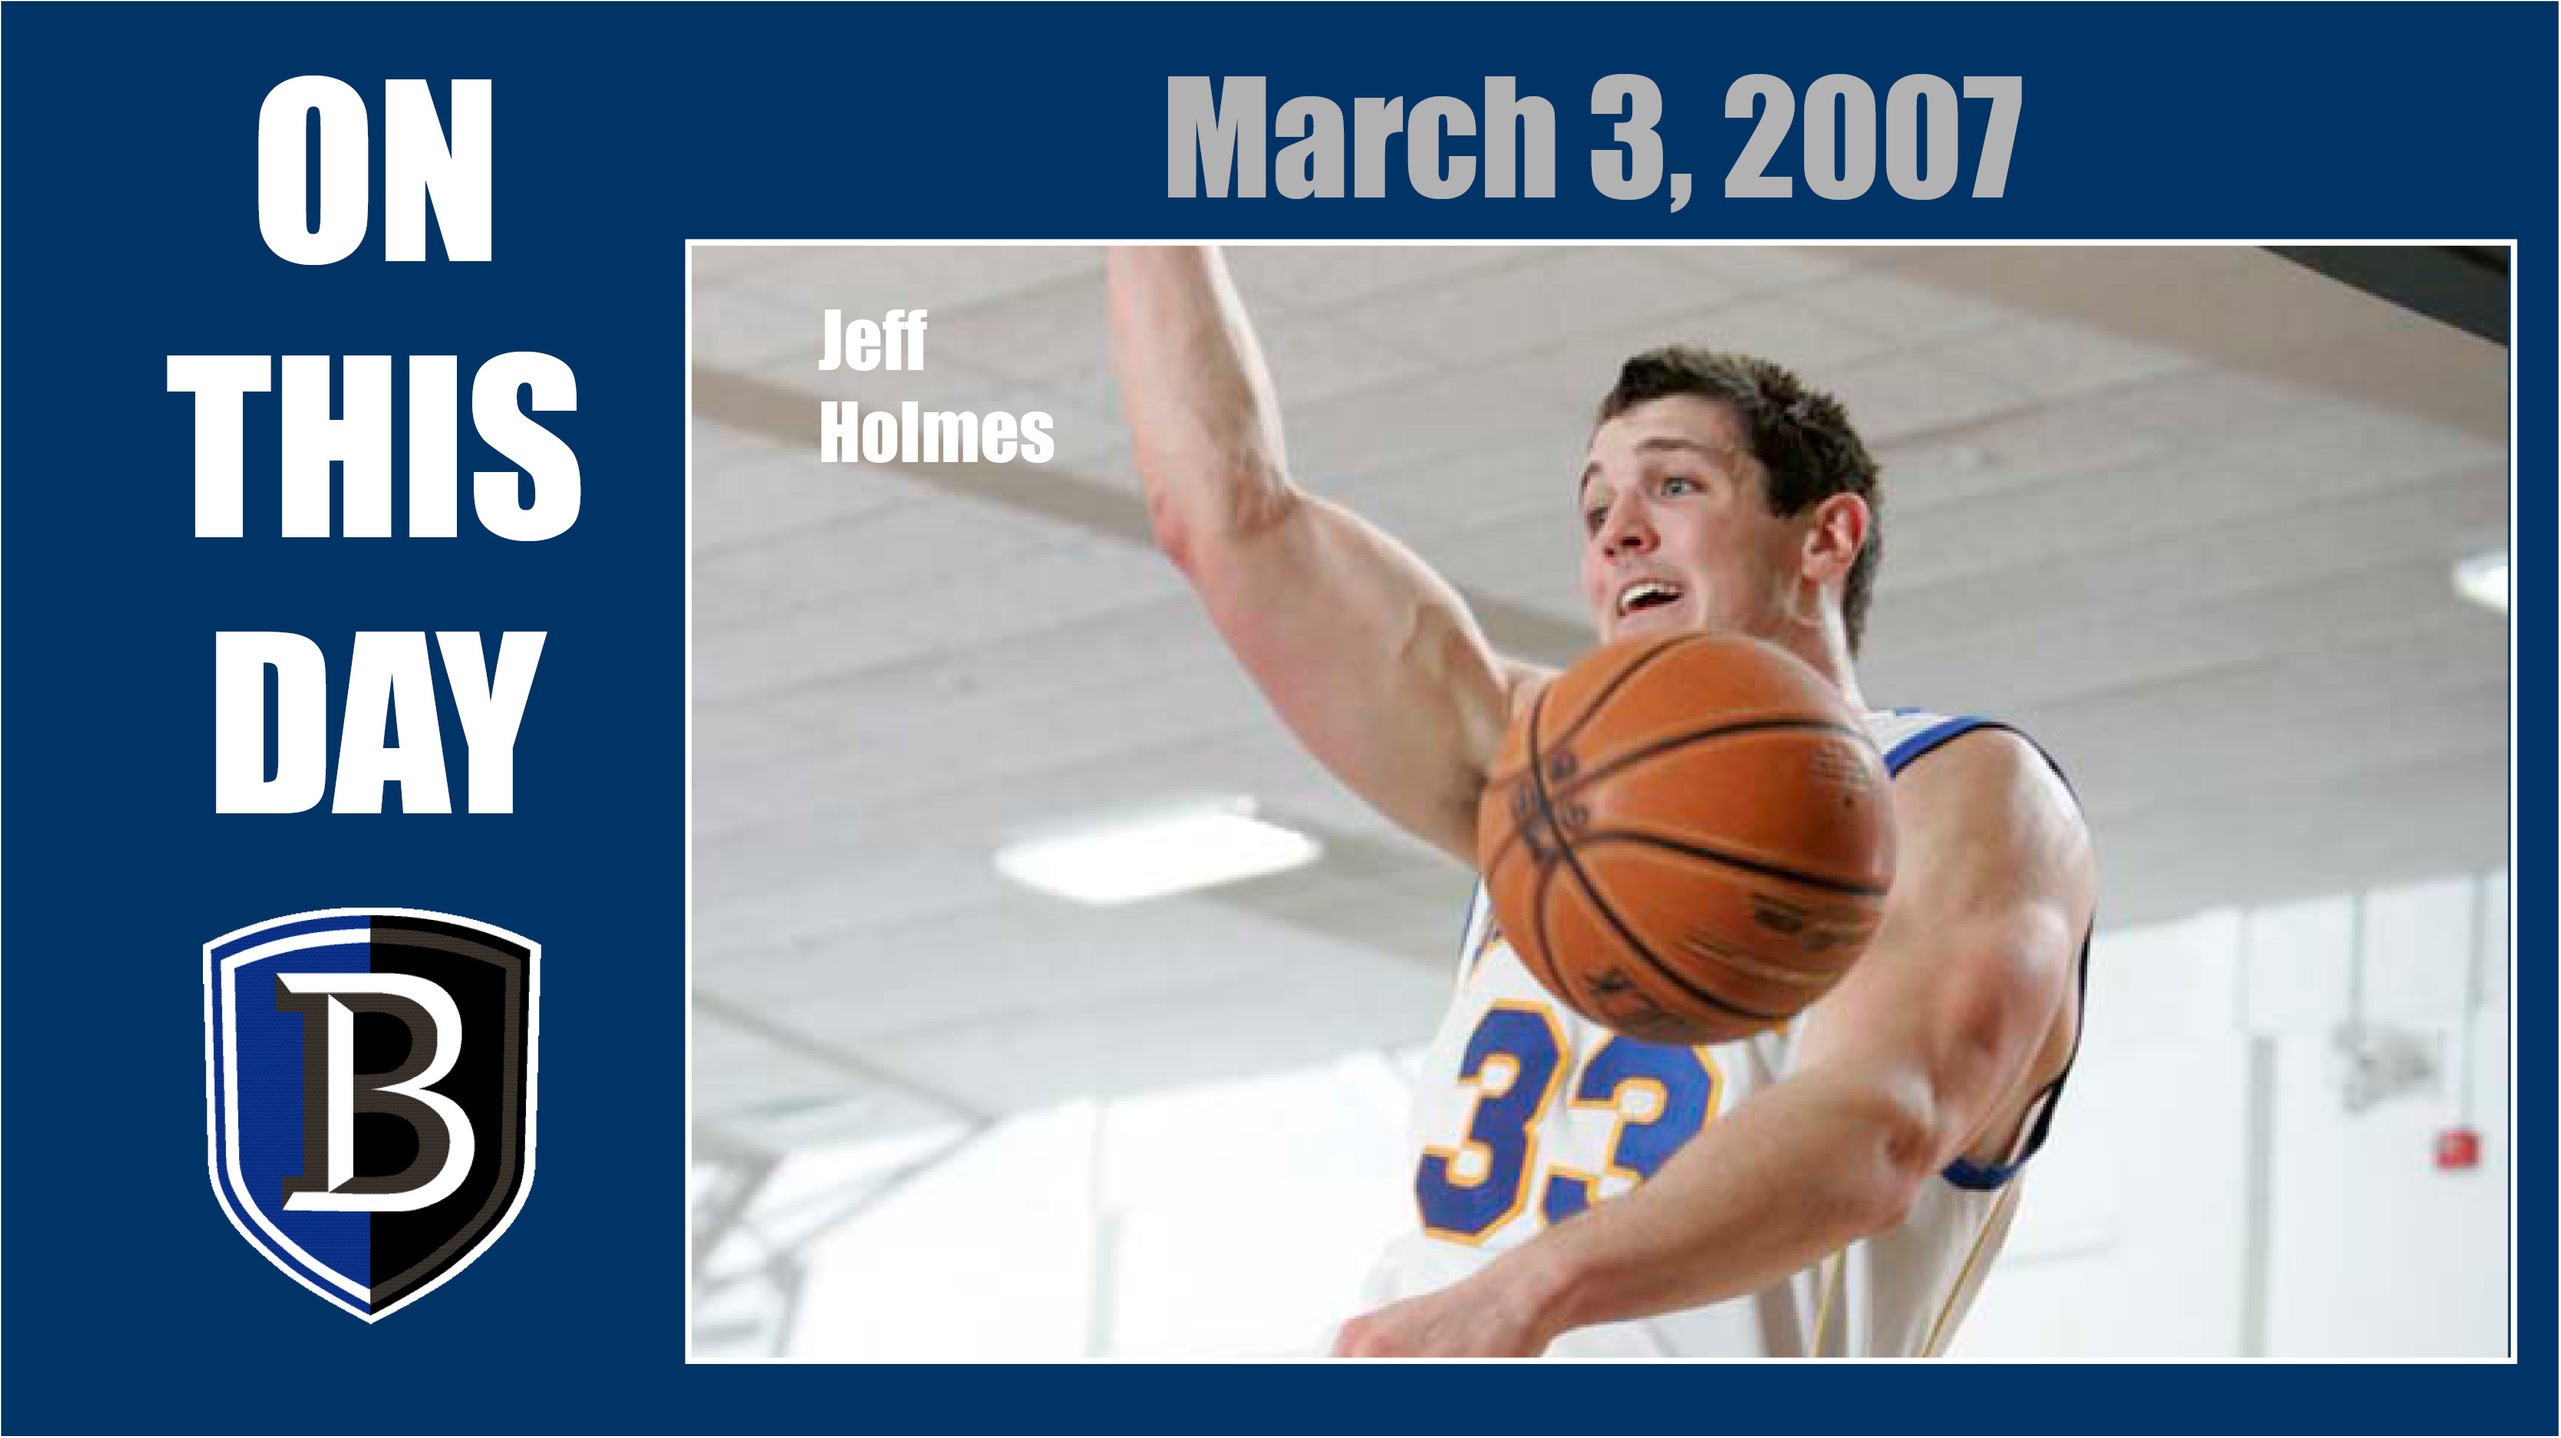 Graphic featuring Jeff Holmes